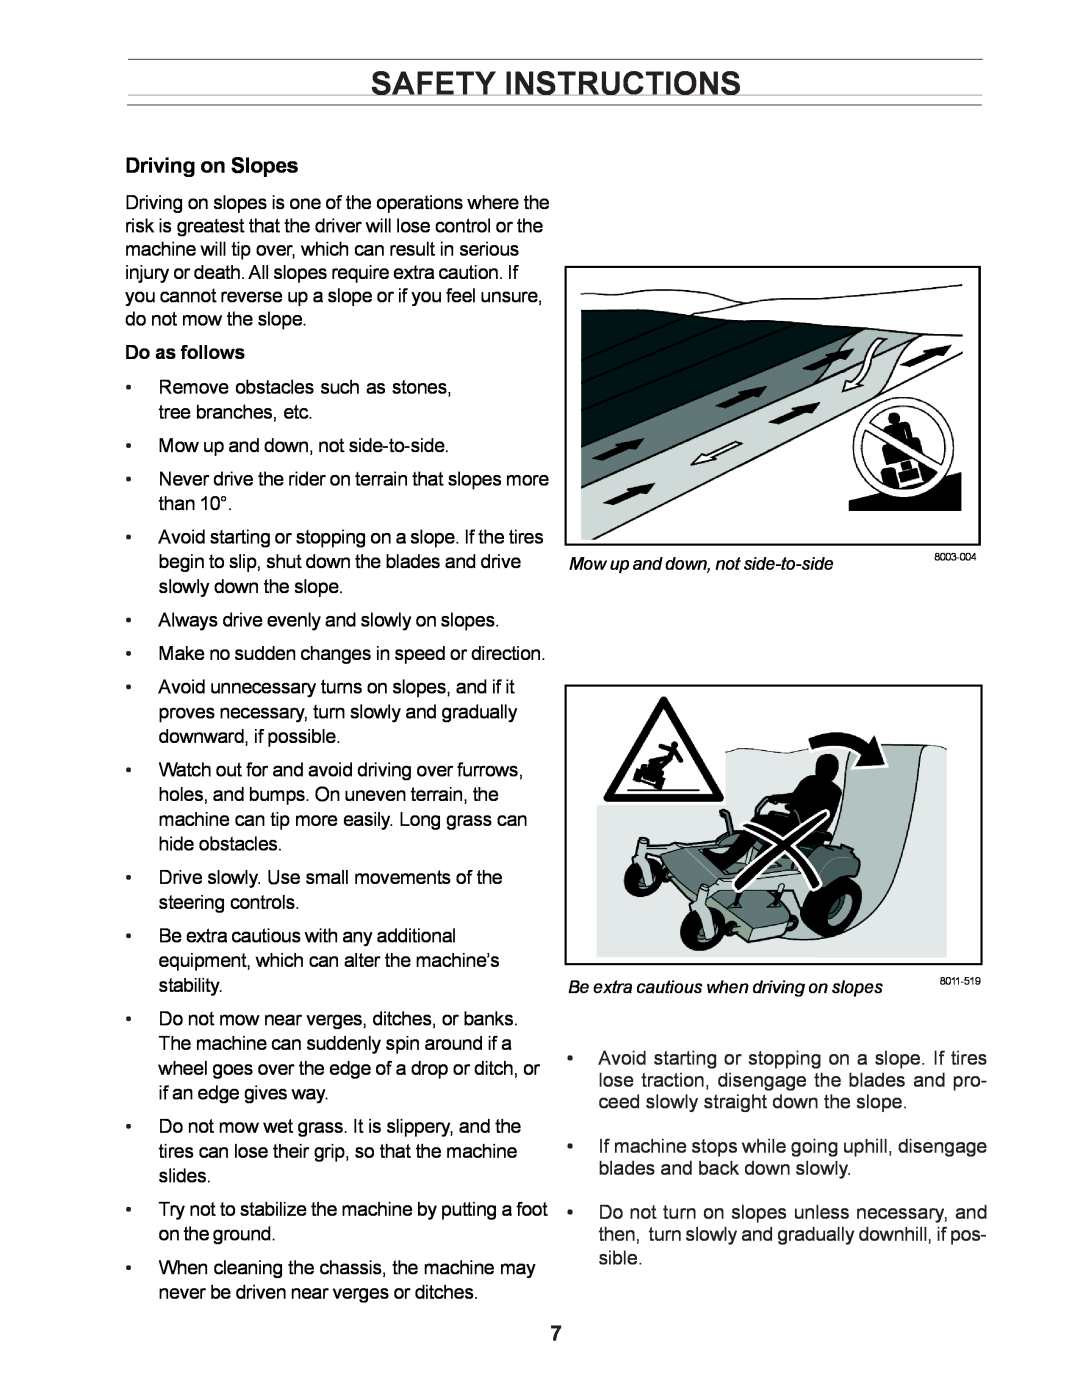 Yazoo/Kees ZCBI48181 manual Driving on Slopes, Do as follows, Safety Instructions 